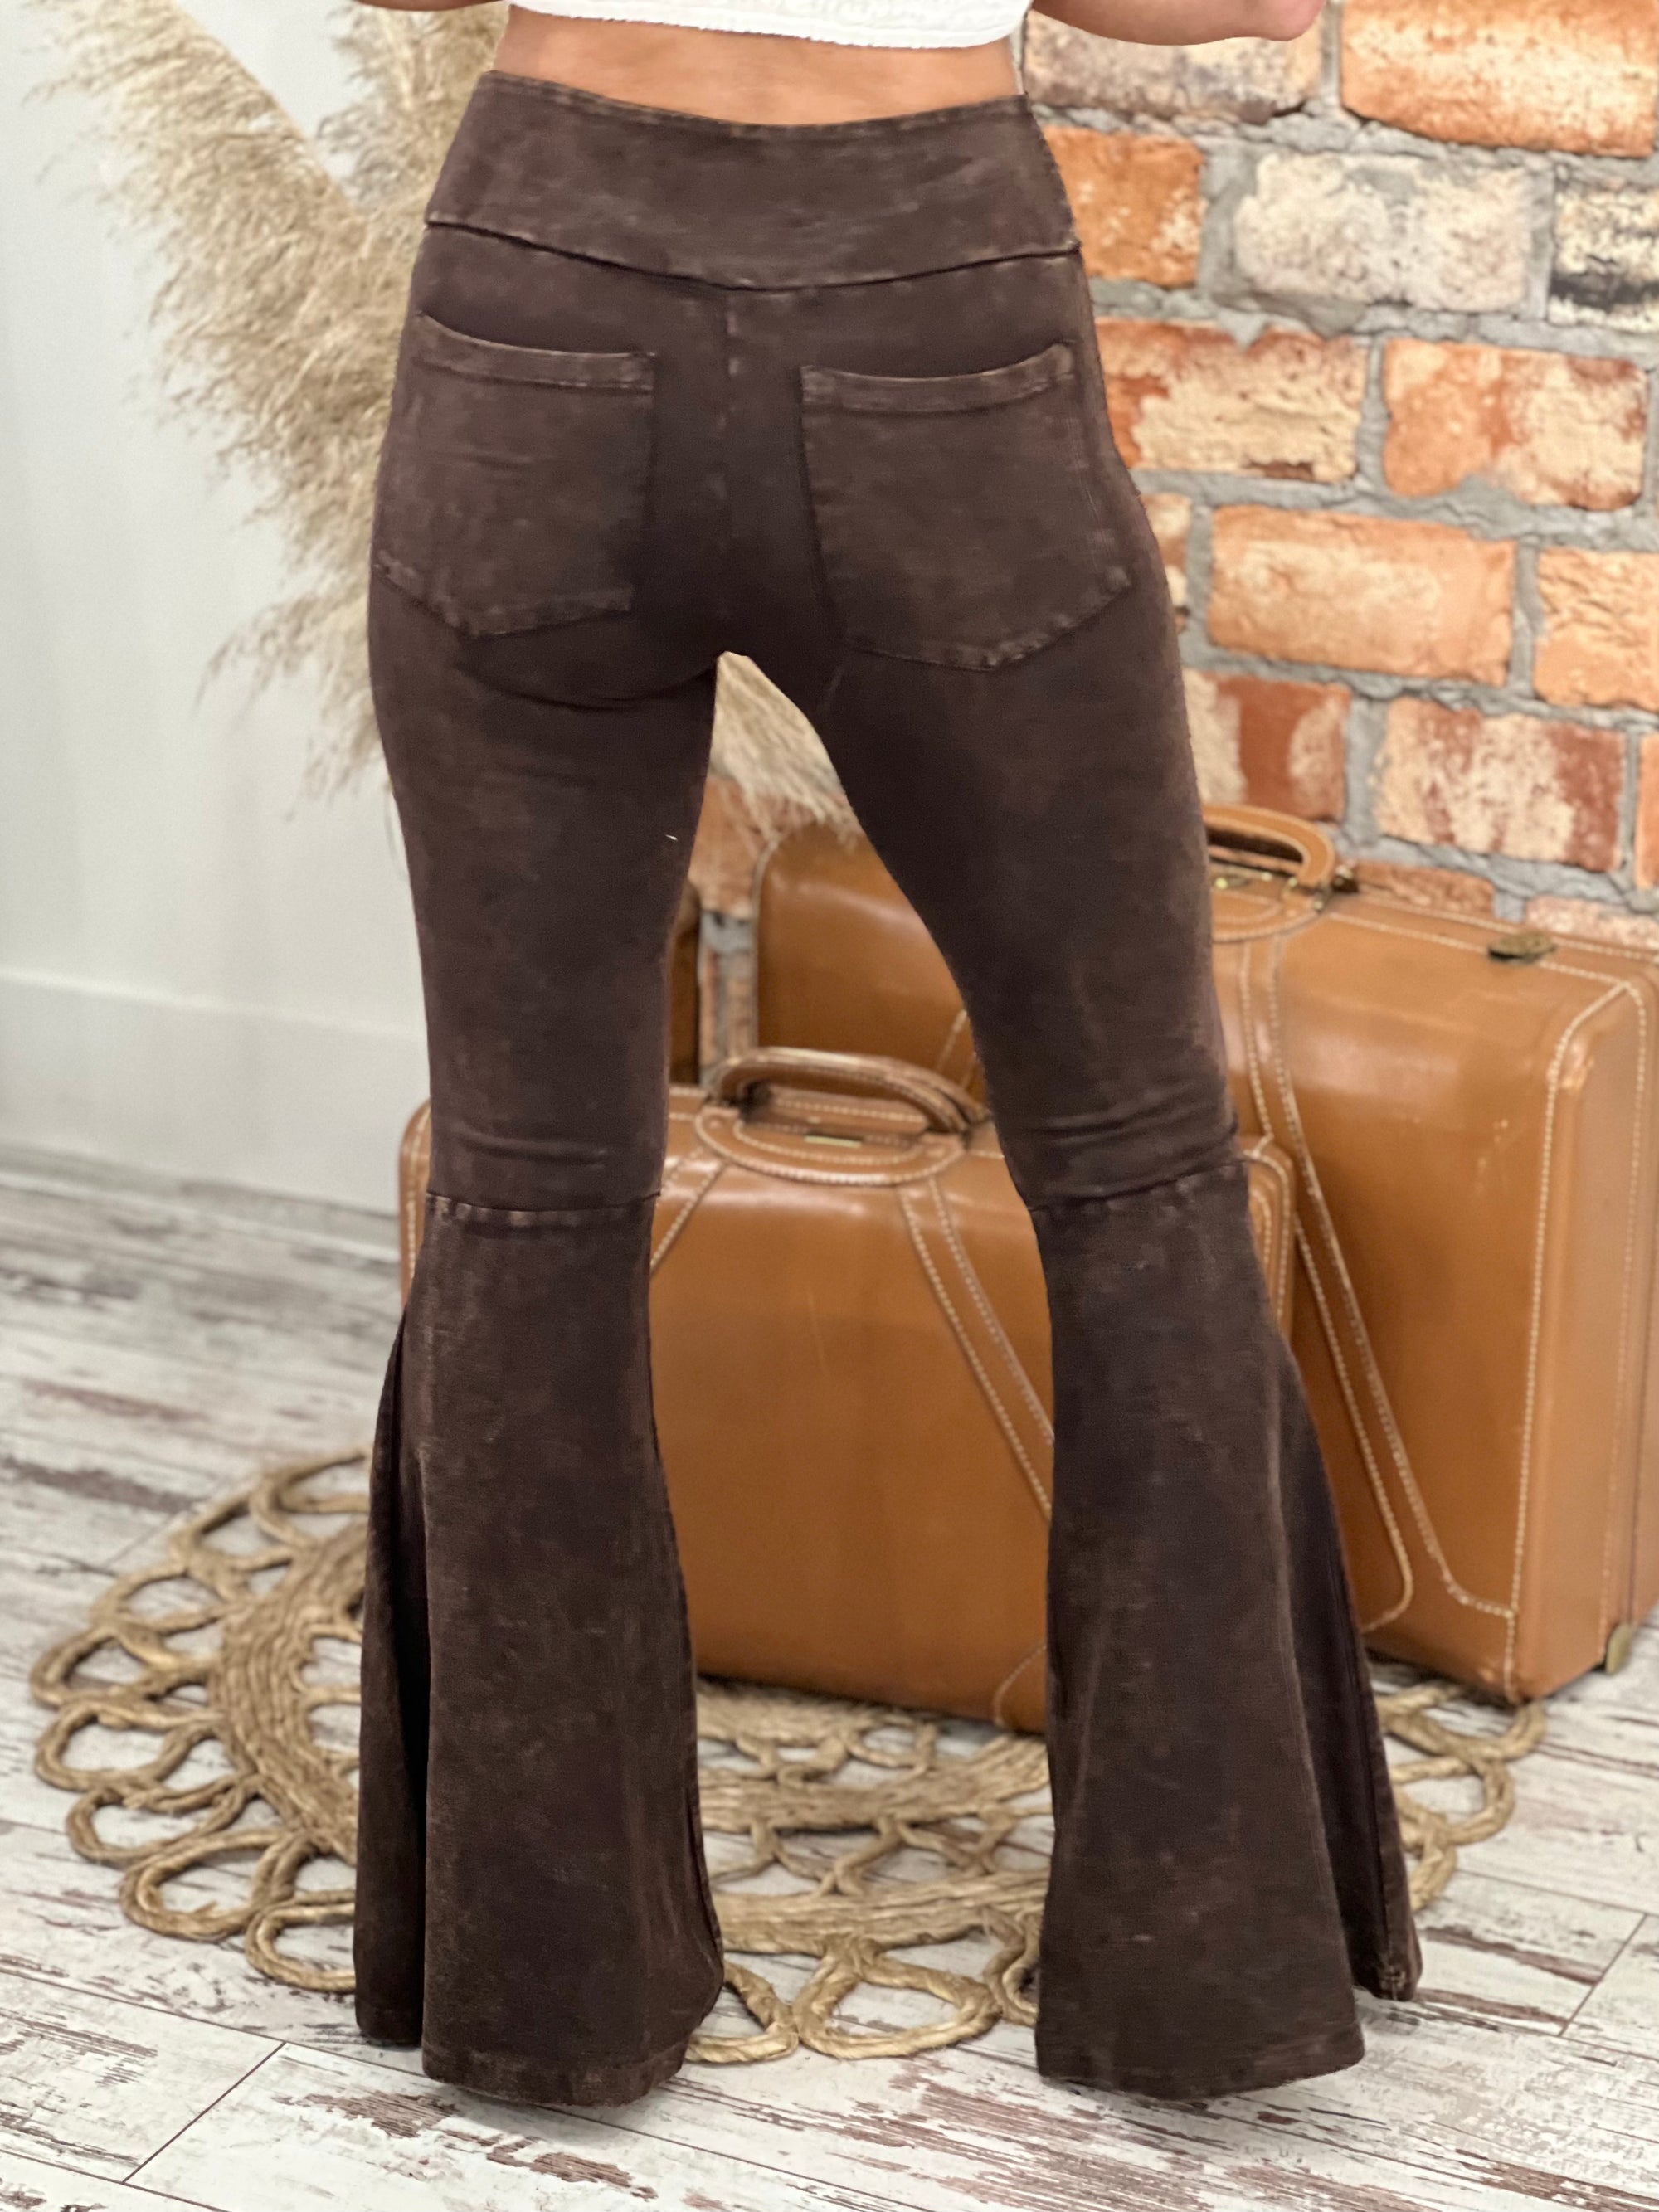 Mineral Wash Bell Bottom Pants in Brown - The Rustic Rack Boutique